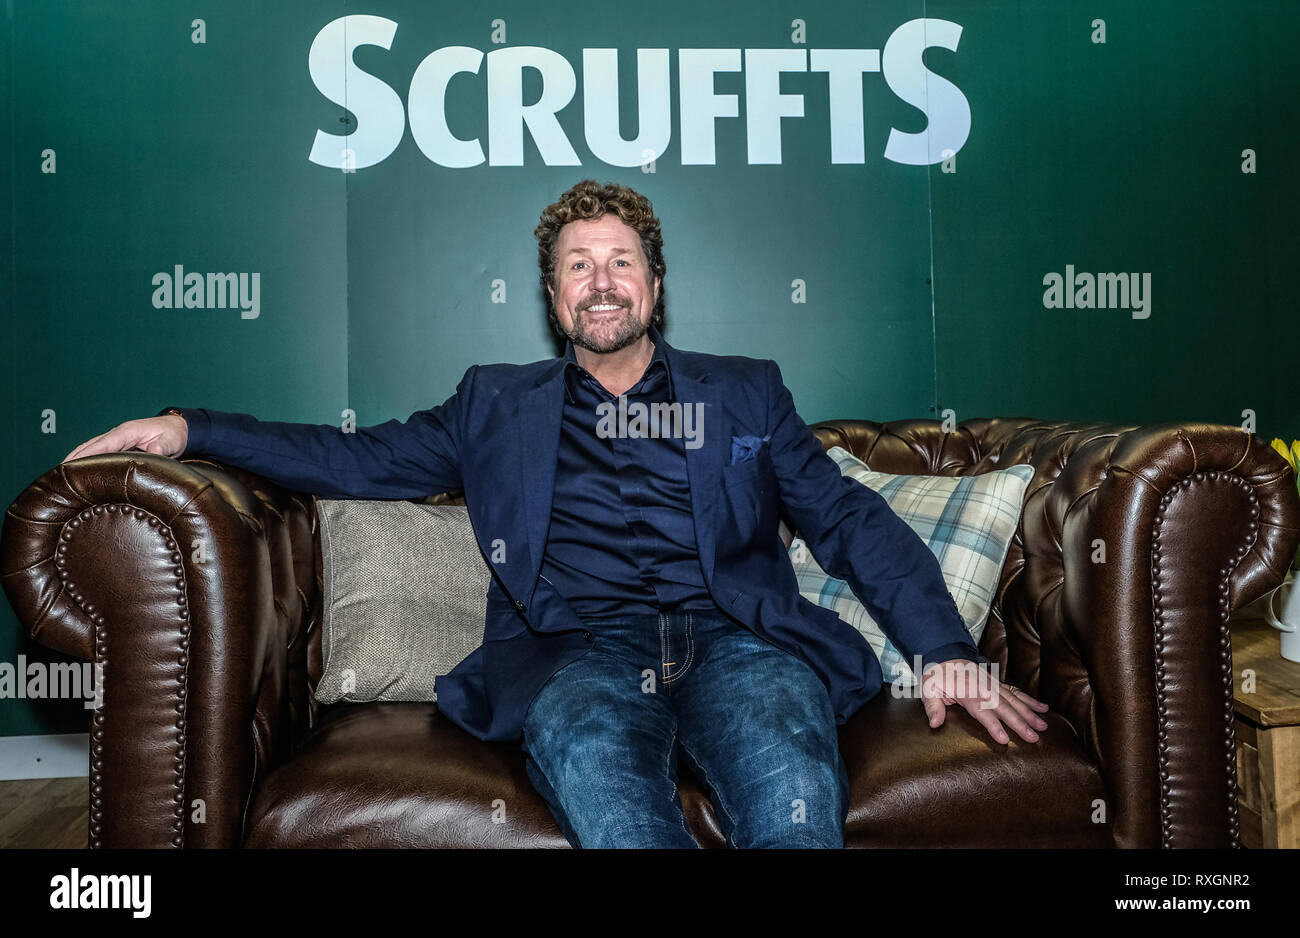 Birmingham, UK. 9th March 2019.  Crufts Dog Show....Singer Michael Ball priorto taking up his role as chief judge for Scruffs competition, the best cross breed dog, at this years Crufts Dog Show.. Credit: charlie bryan/Alamy Live News Stock Photo